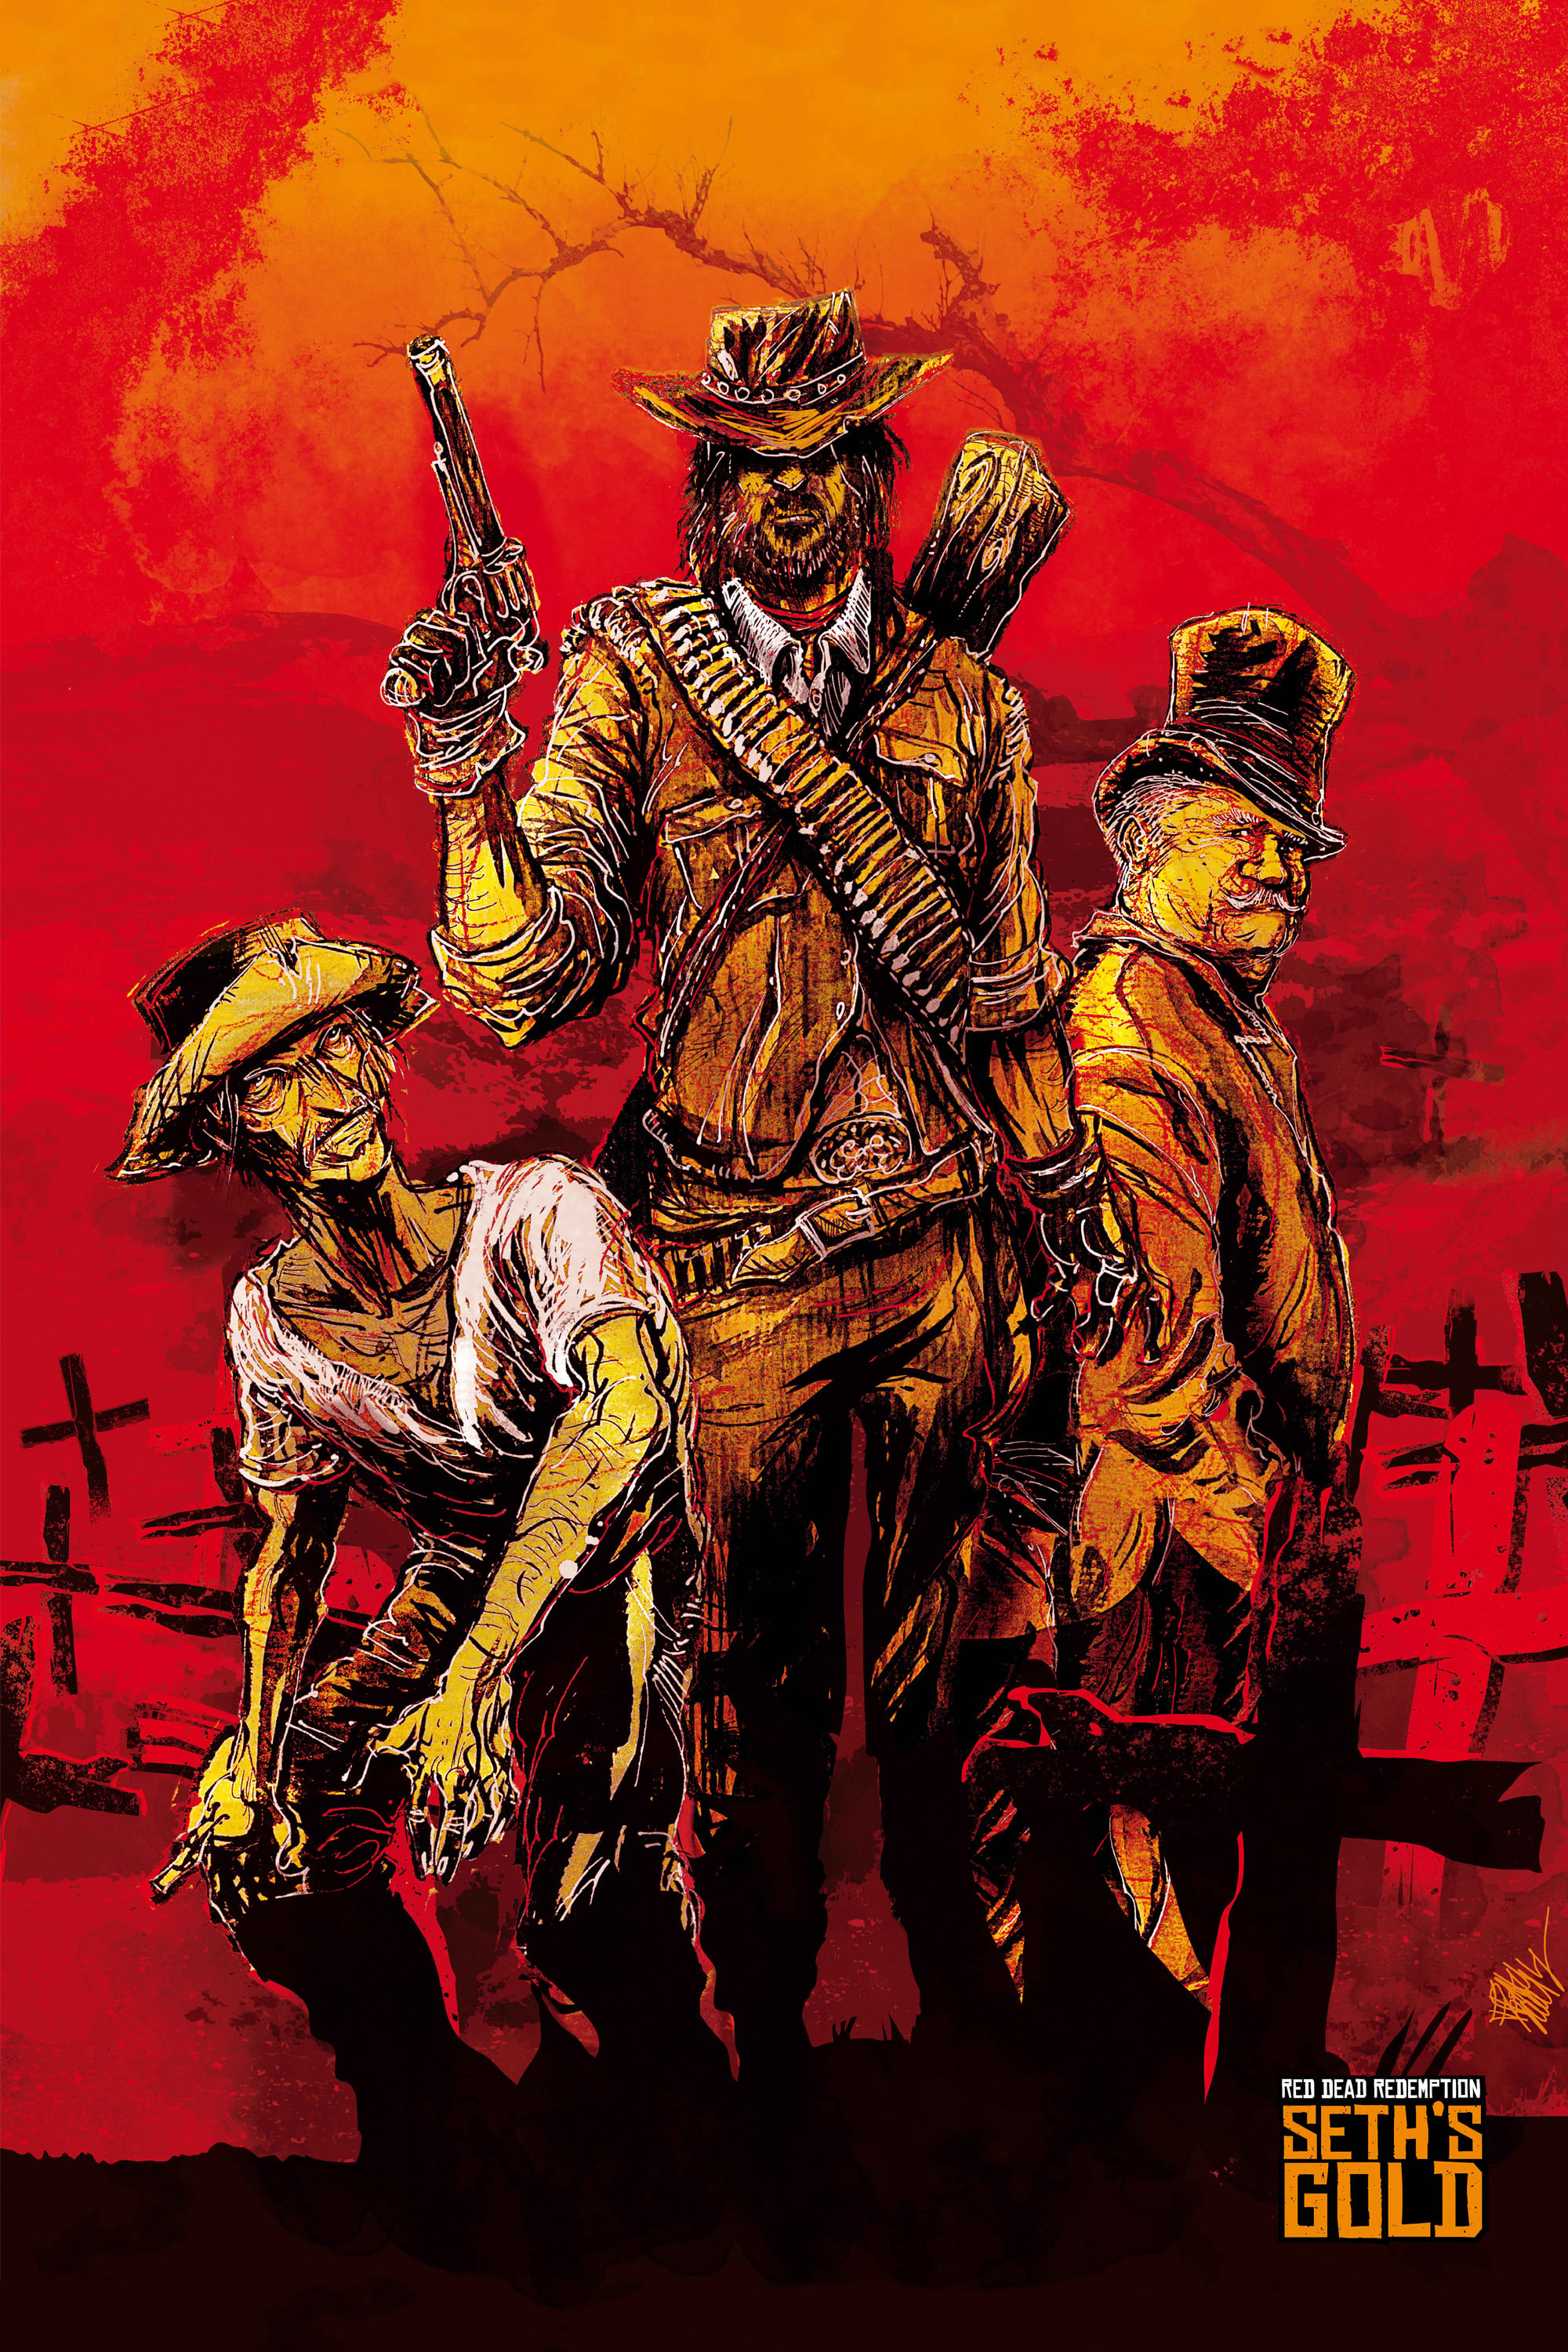 Red Dead Redemption: Seth's Gold